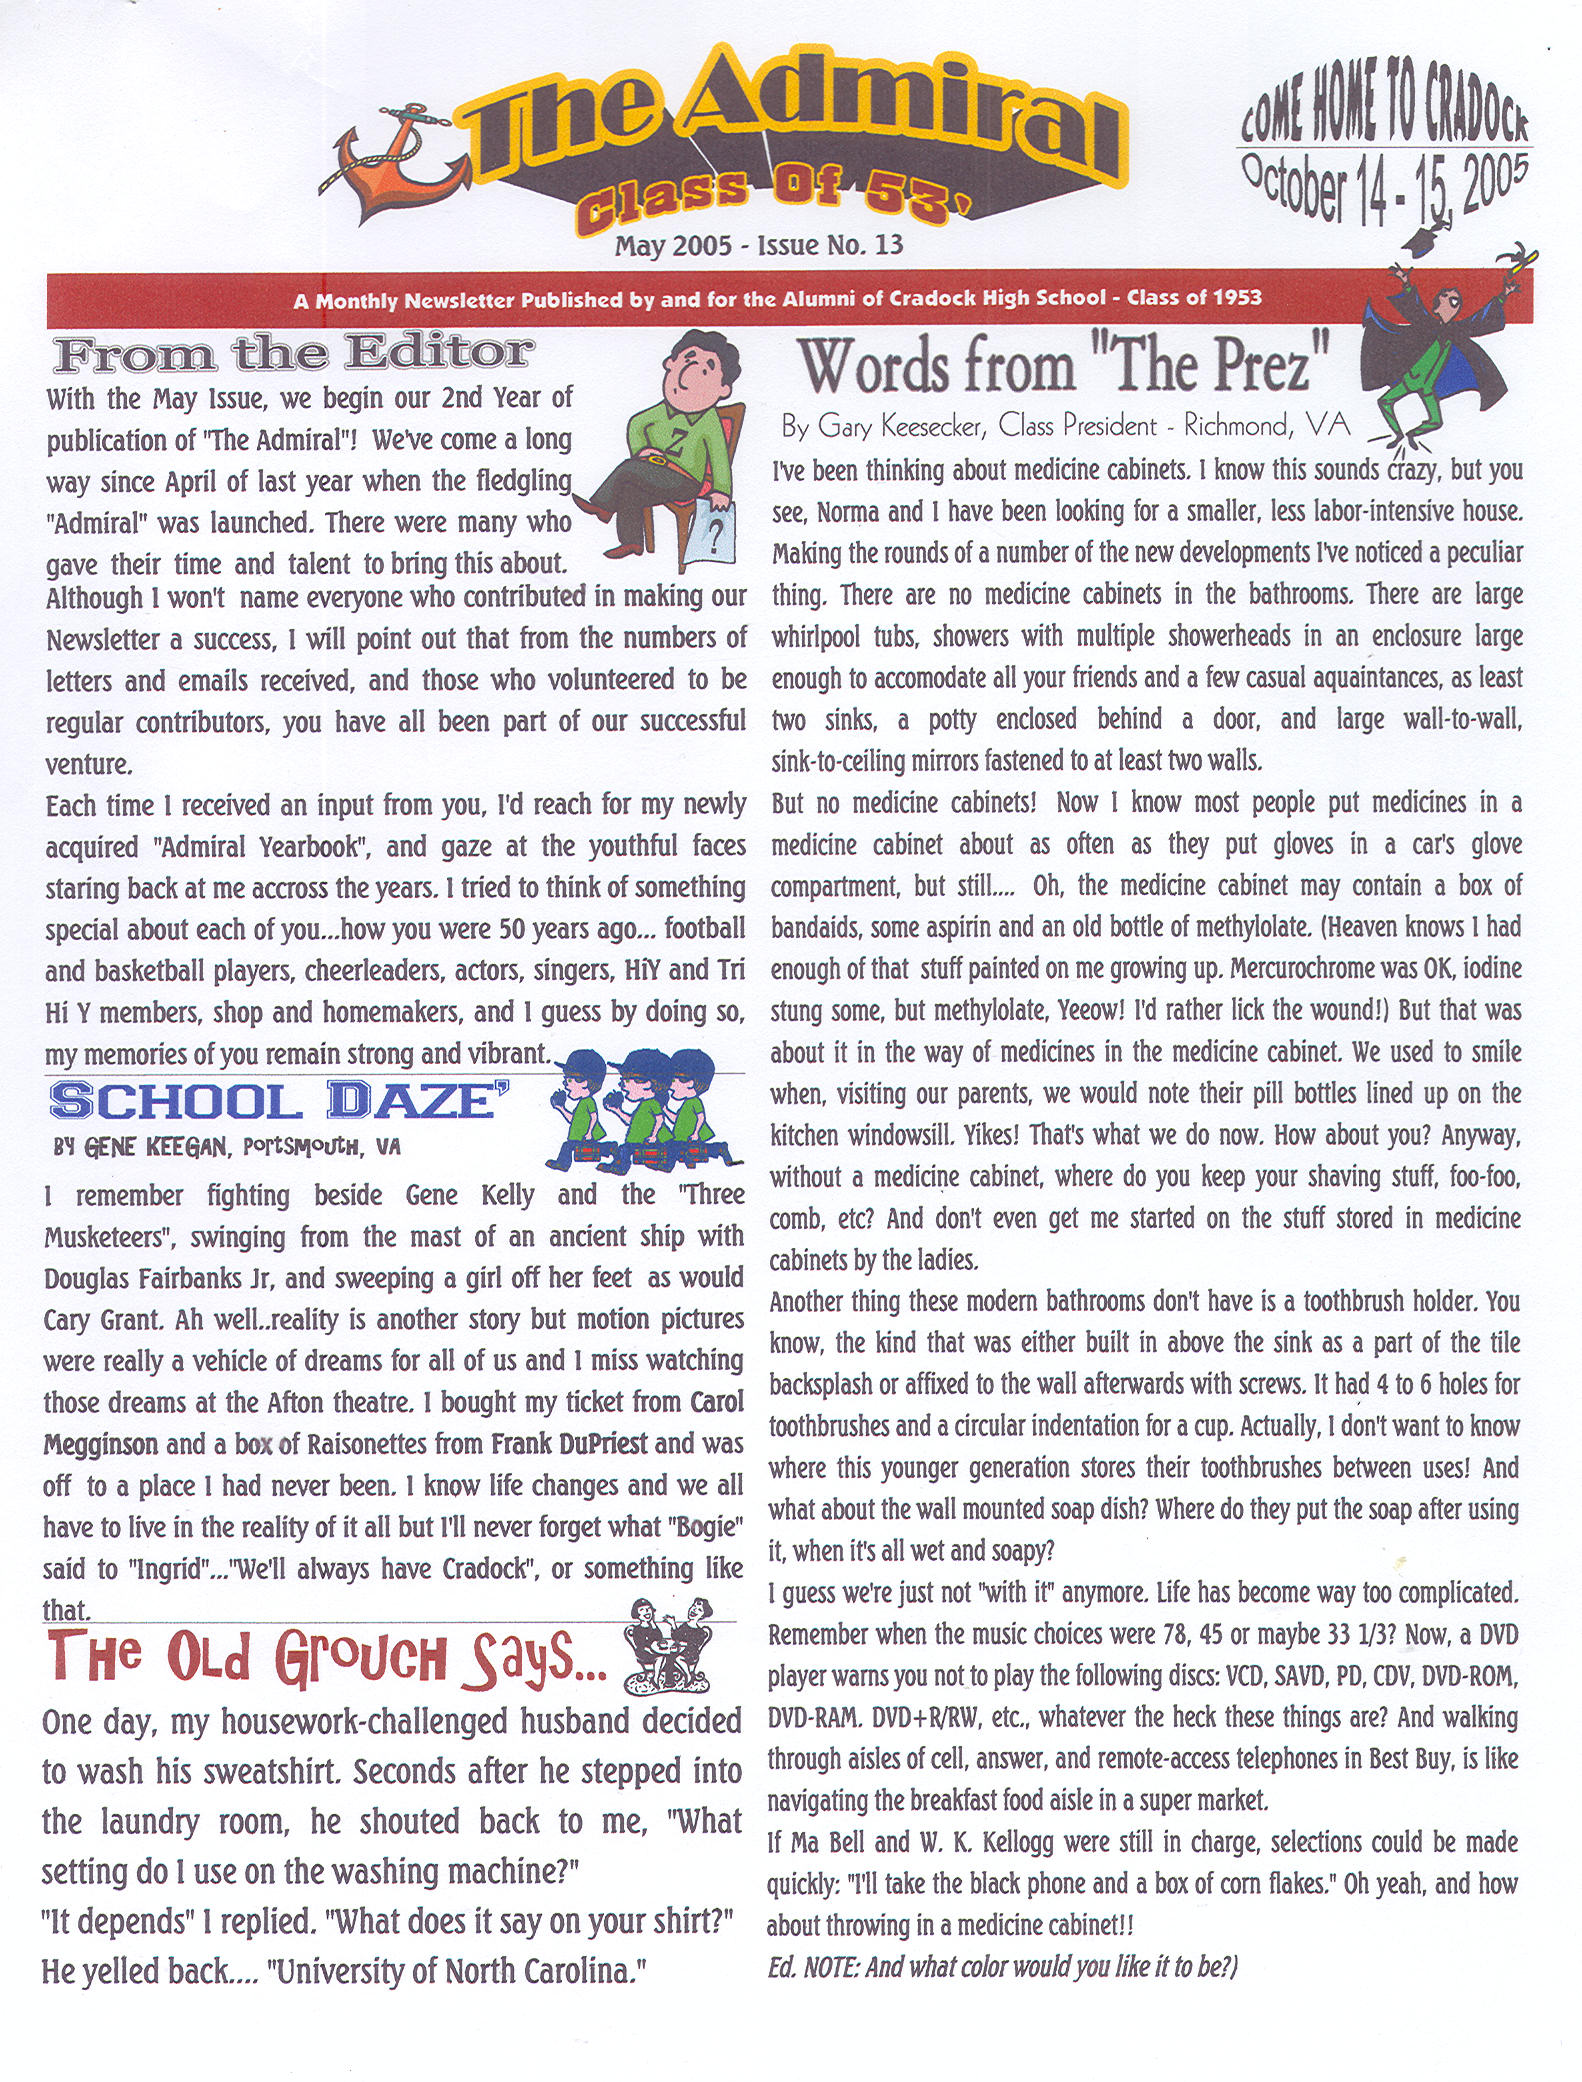 The Admiral - May 2005 - pg. 1